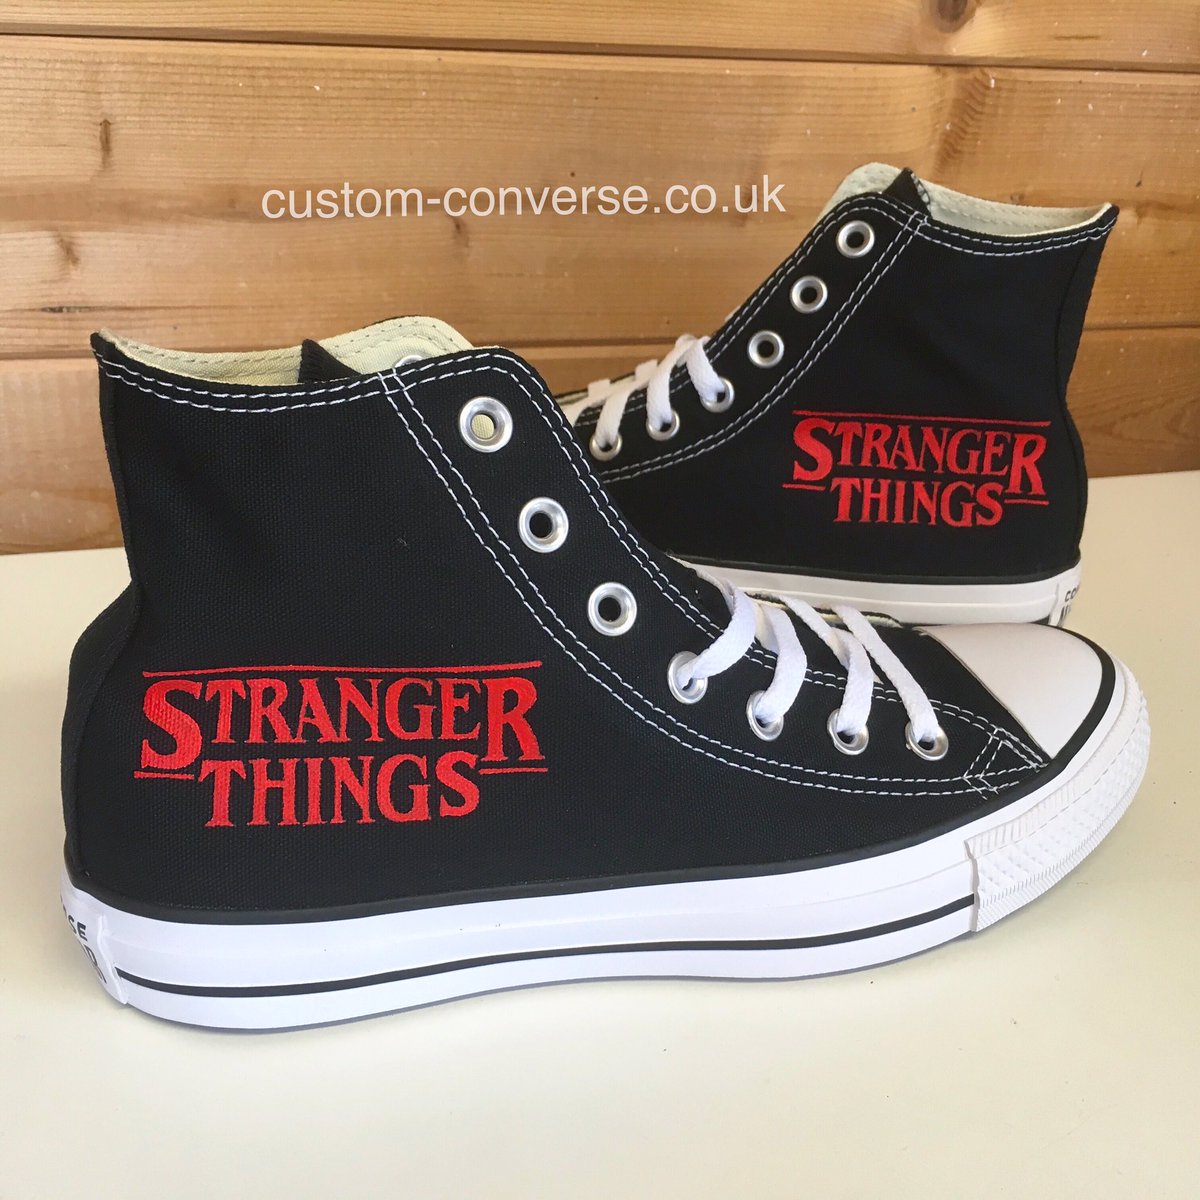 Custom Converse on Twitter: "New on the website! Stranger Things high tops  with the logo in red on both shoes 👌🏻 https://t.co/oH0a7Wrbma  https://t.co/tvD5upyiMX" / Twitter